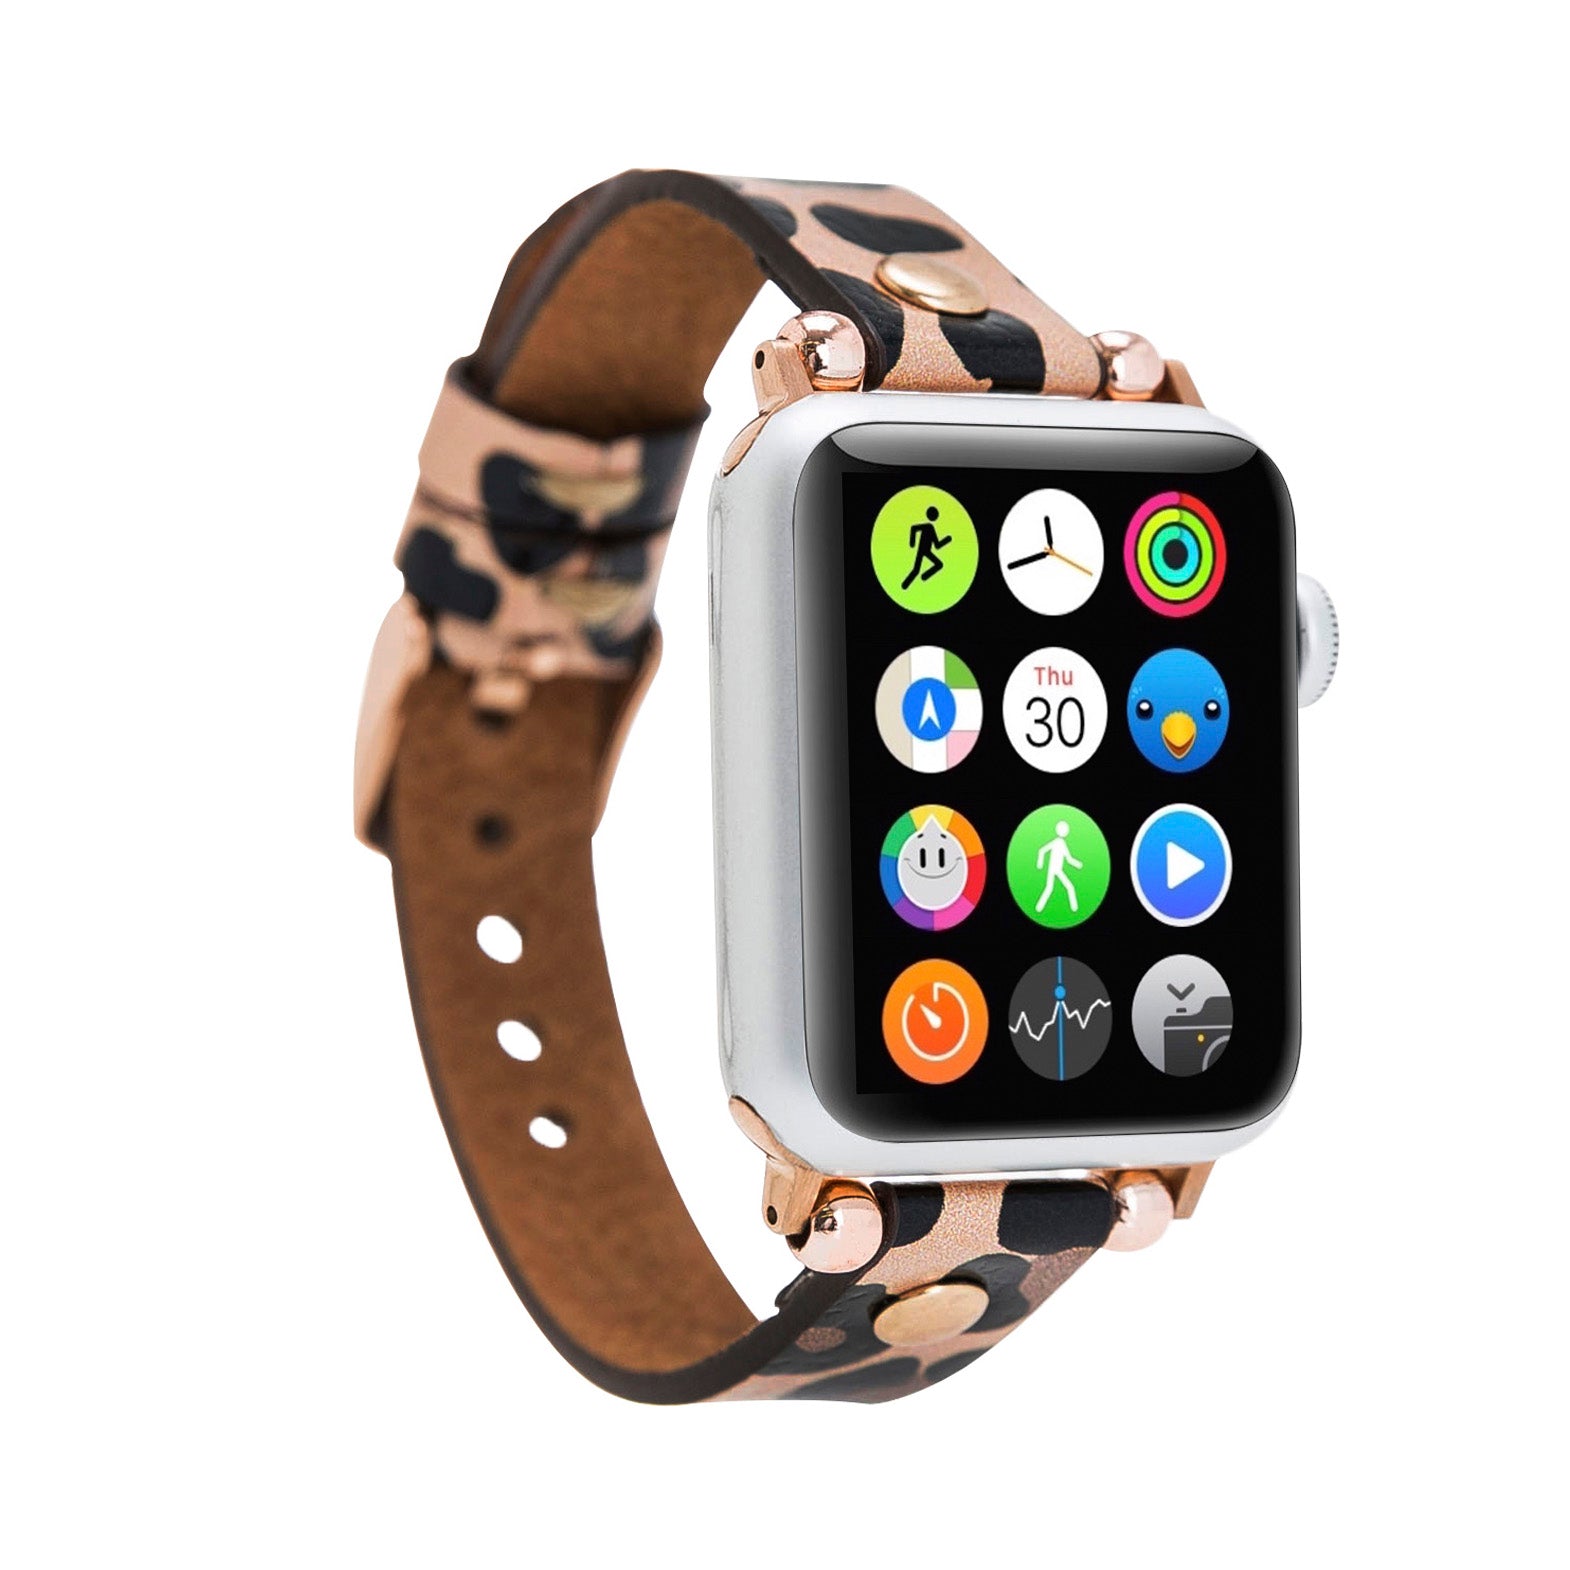 Ferro Strap - Full Grain Leather Band for Apple Watch - LEOPARD PATTERNED - saracleather